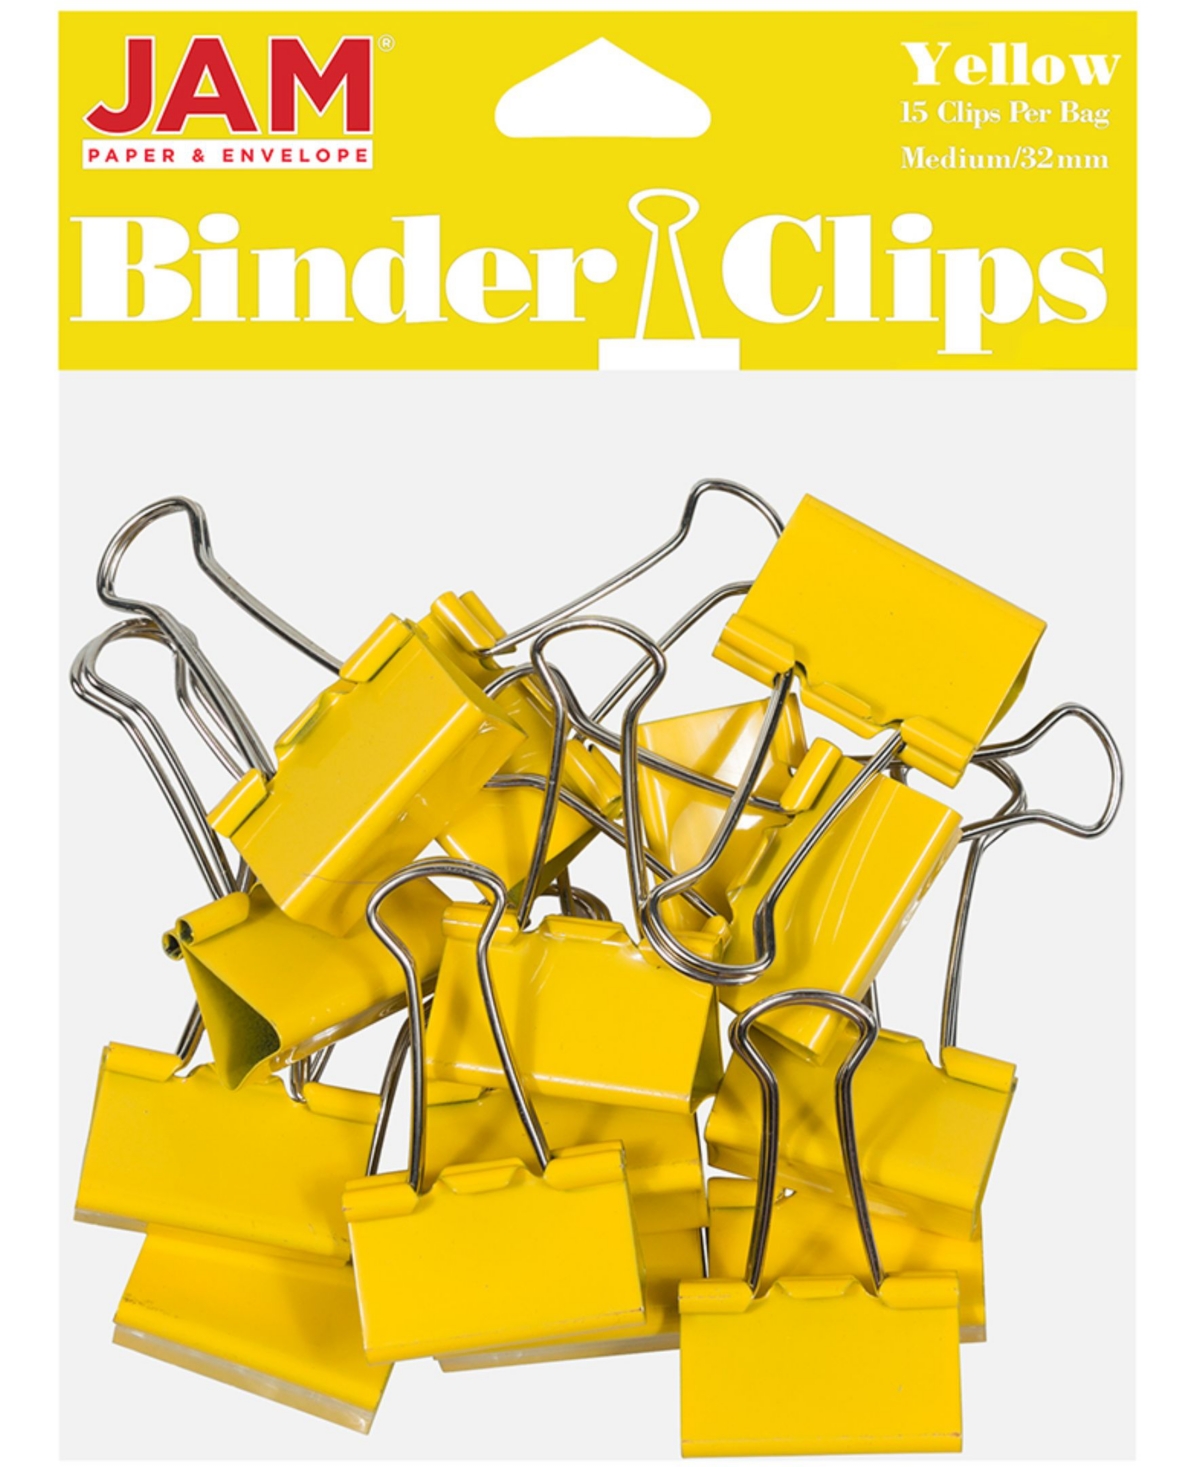 Jam Paper Colorful Binder Clips In Yellow